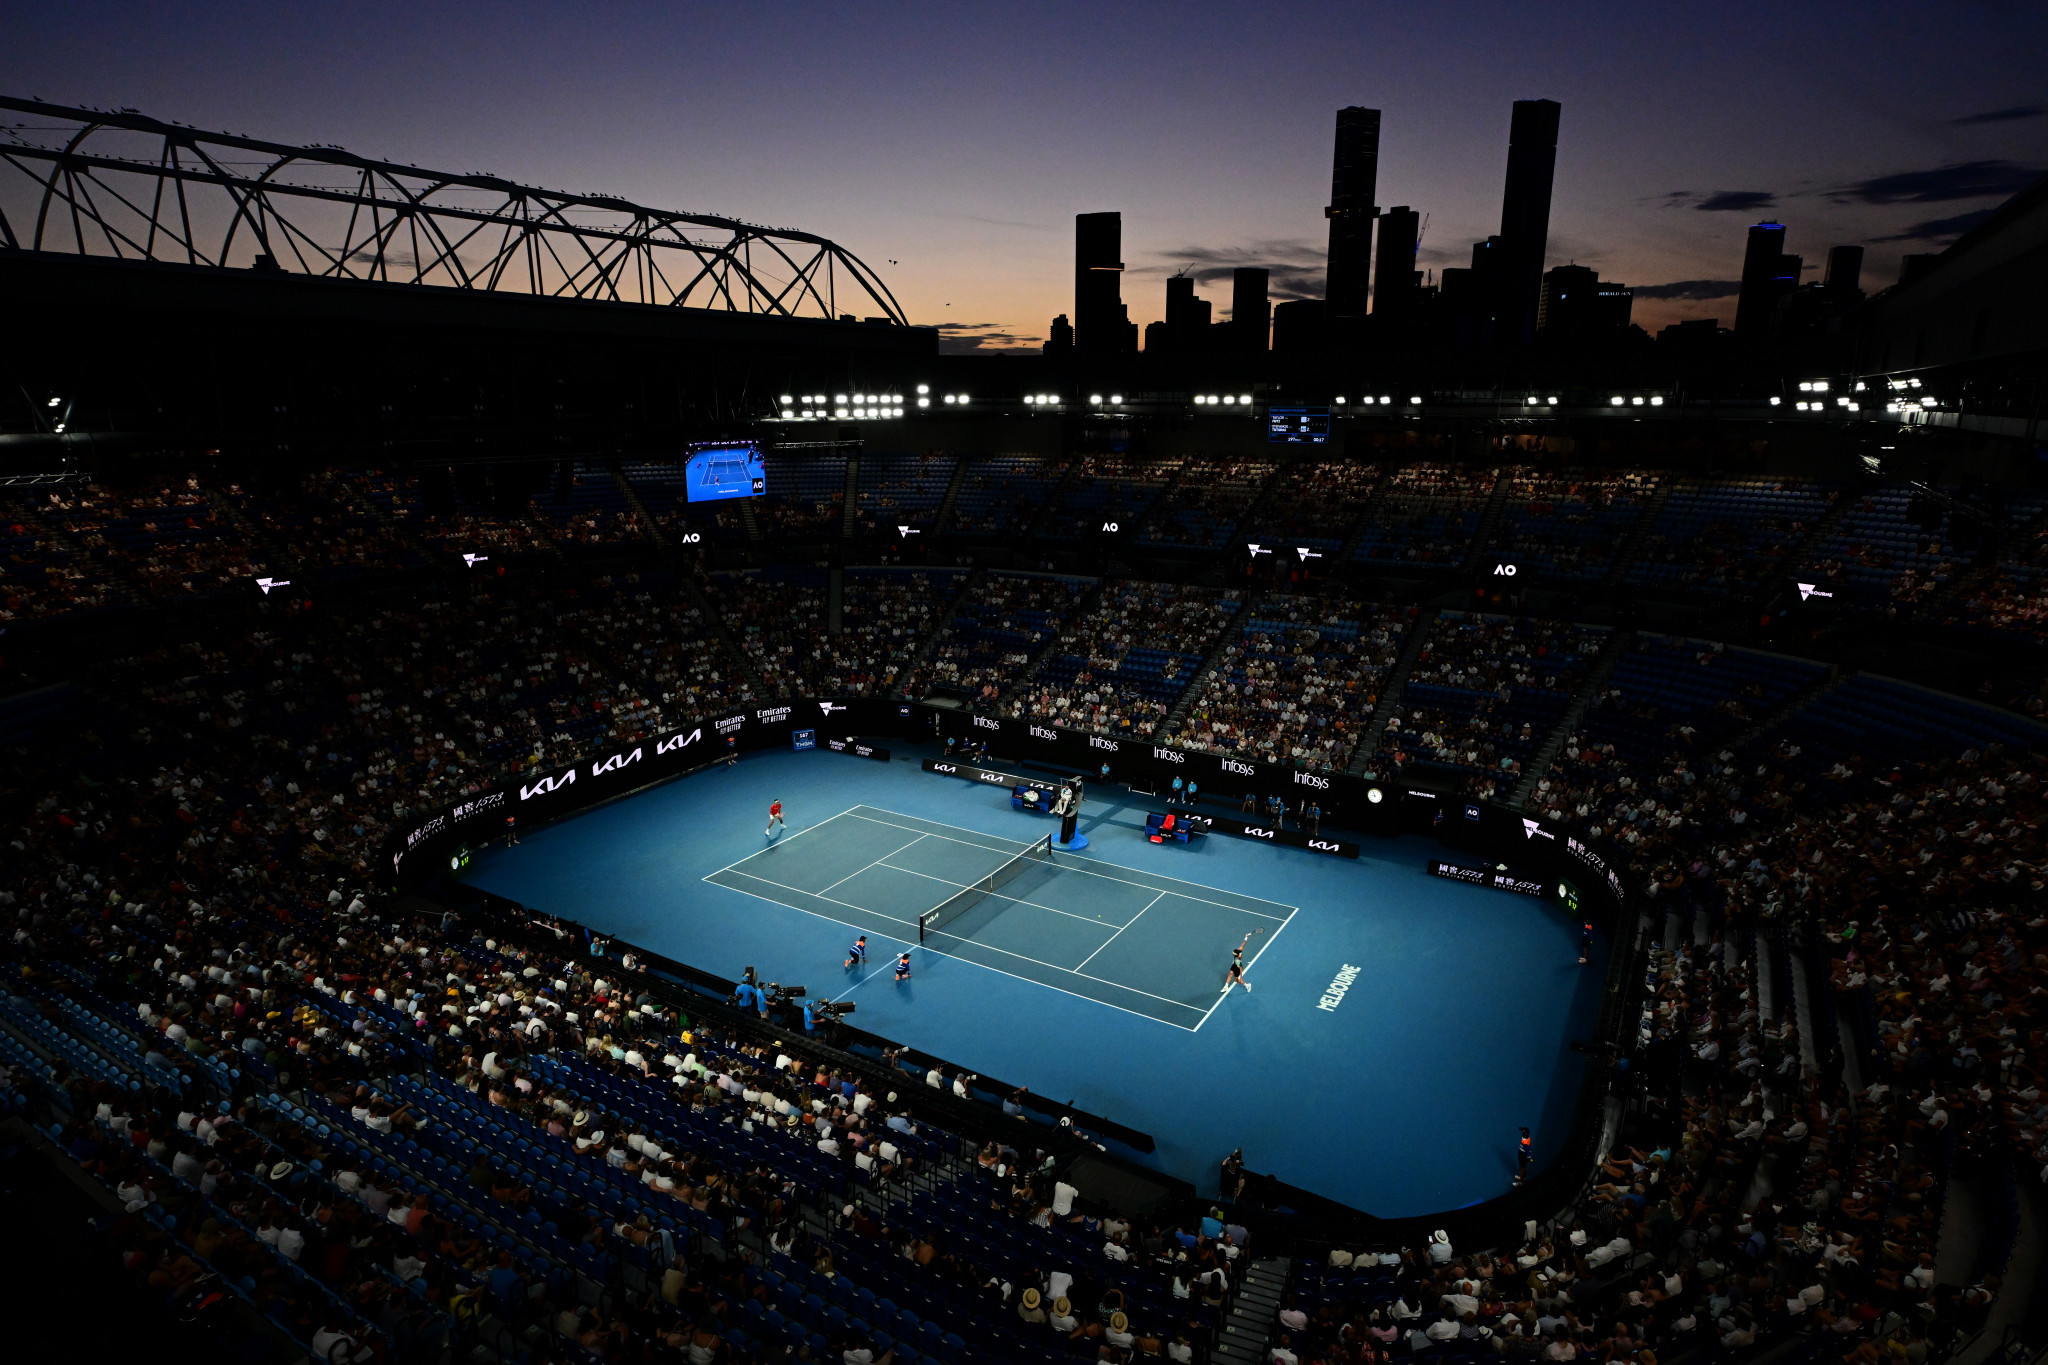 The match between Greece's Stefanos Tsitsipas and the United States' Taylor Fritz on Rod Laver Arena took three hours and 23 minutes to complete ©Getty Images